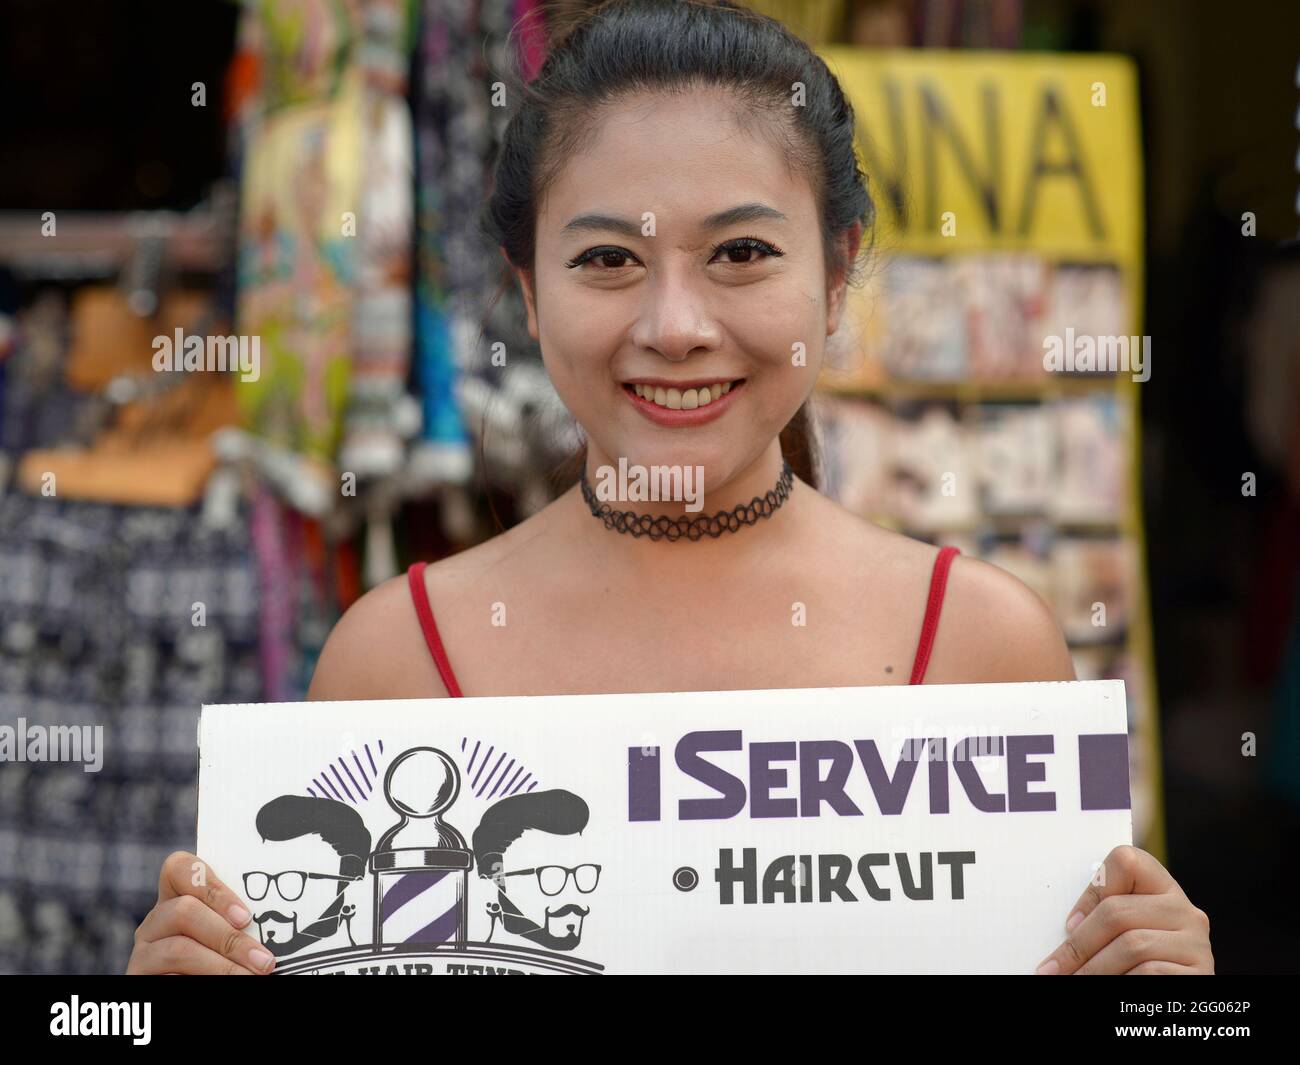 Cheerful young beautiful female Thai hairstylist advertises her haircut service on a hand-held sign board and smiles for the viewer. Stock Photo